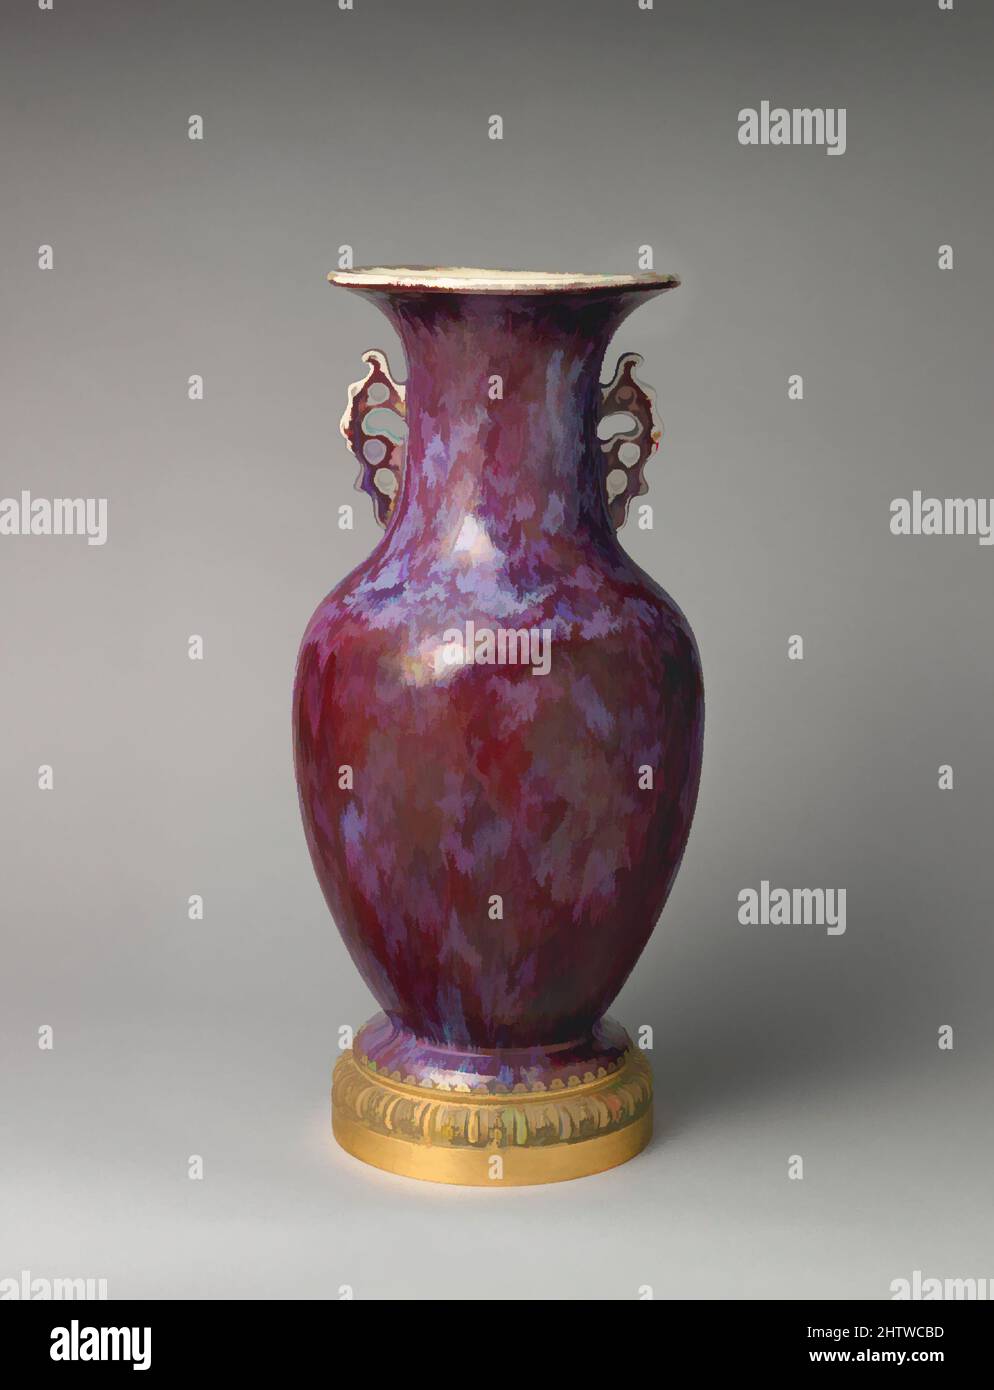 Art inspired by Vase, ca. 1891, French, Choisy-le-Roi, Porcelain, brass, confirmed: 20 11/16 × 9 3/4 × 9 3/4 in., 18 lb. (52.5 × 24.8 × 24.8 cm, 8.2 kg), Ceramics-Porcelain, Creating a marbled glaze required an extensive knowledge of chemical reactions and firing temperatures. Chaplet’, Classic works modernized by Artotop with a splash of modernity. Shapes, color and value, eye-catching visual impact on art. Emotions through freedom of artworks in a contemporary way. A timeless message pursuing a wildly creative new direction. Artists turning to the digital medium and creating the Artotop NFT Stock Photo